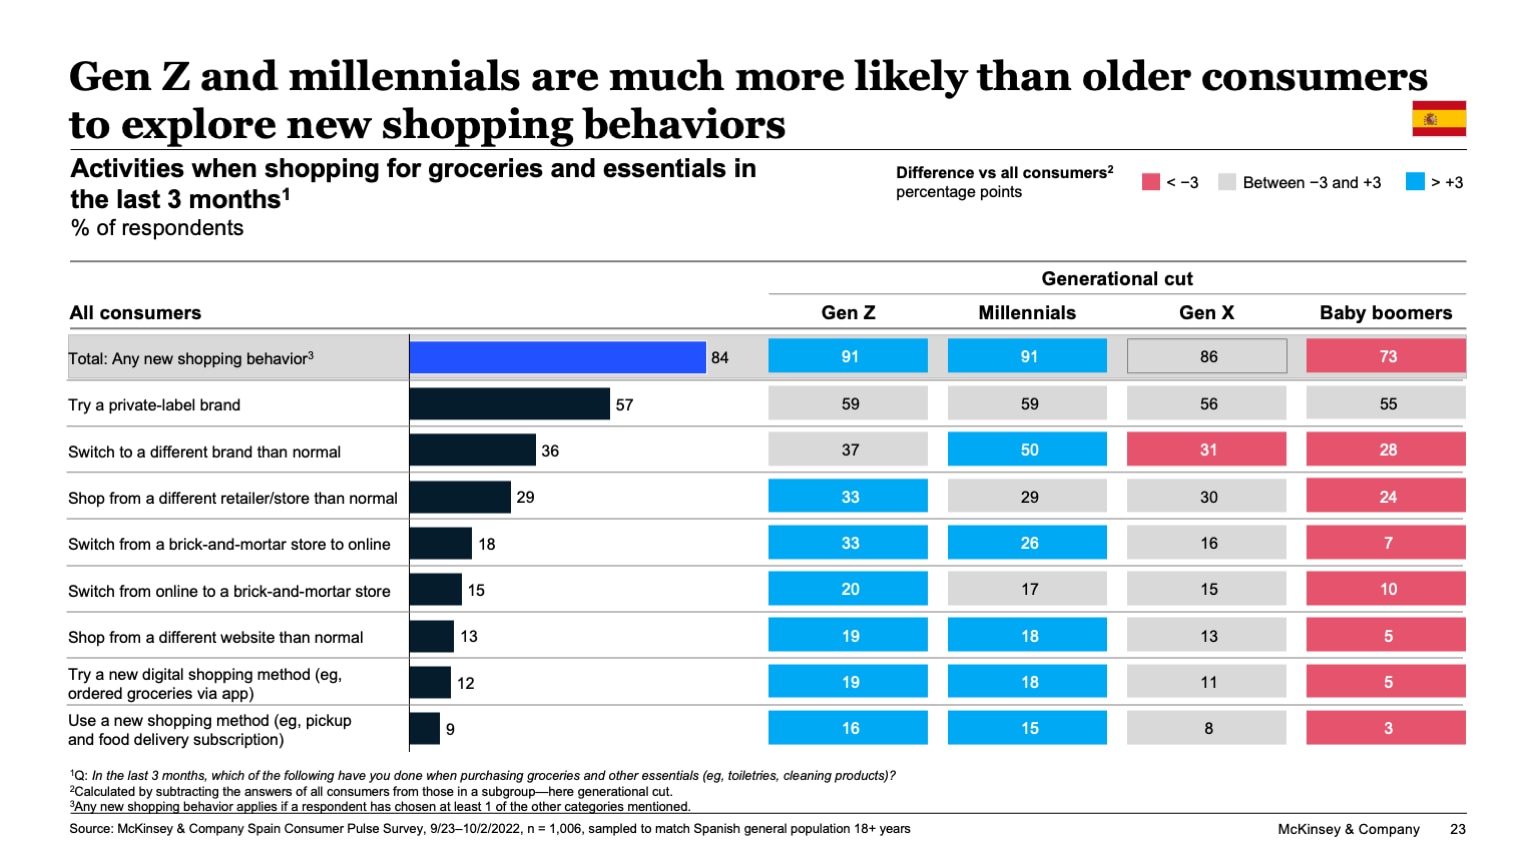 Gen Z and millennials are much more likely than older consumers to explore new shopping behaviors